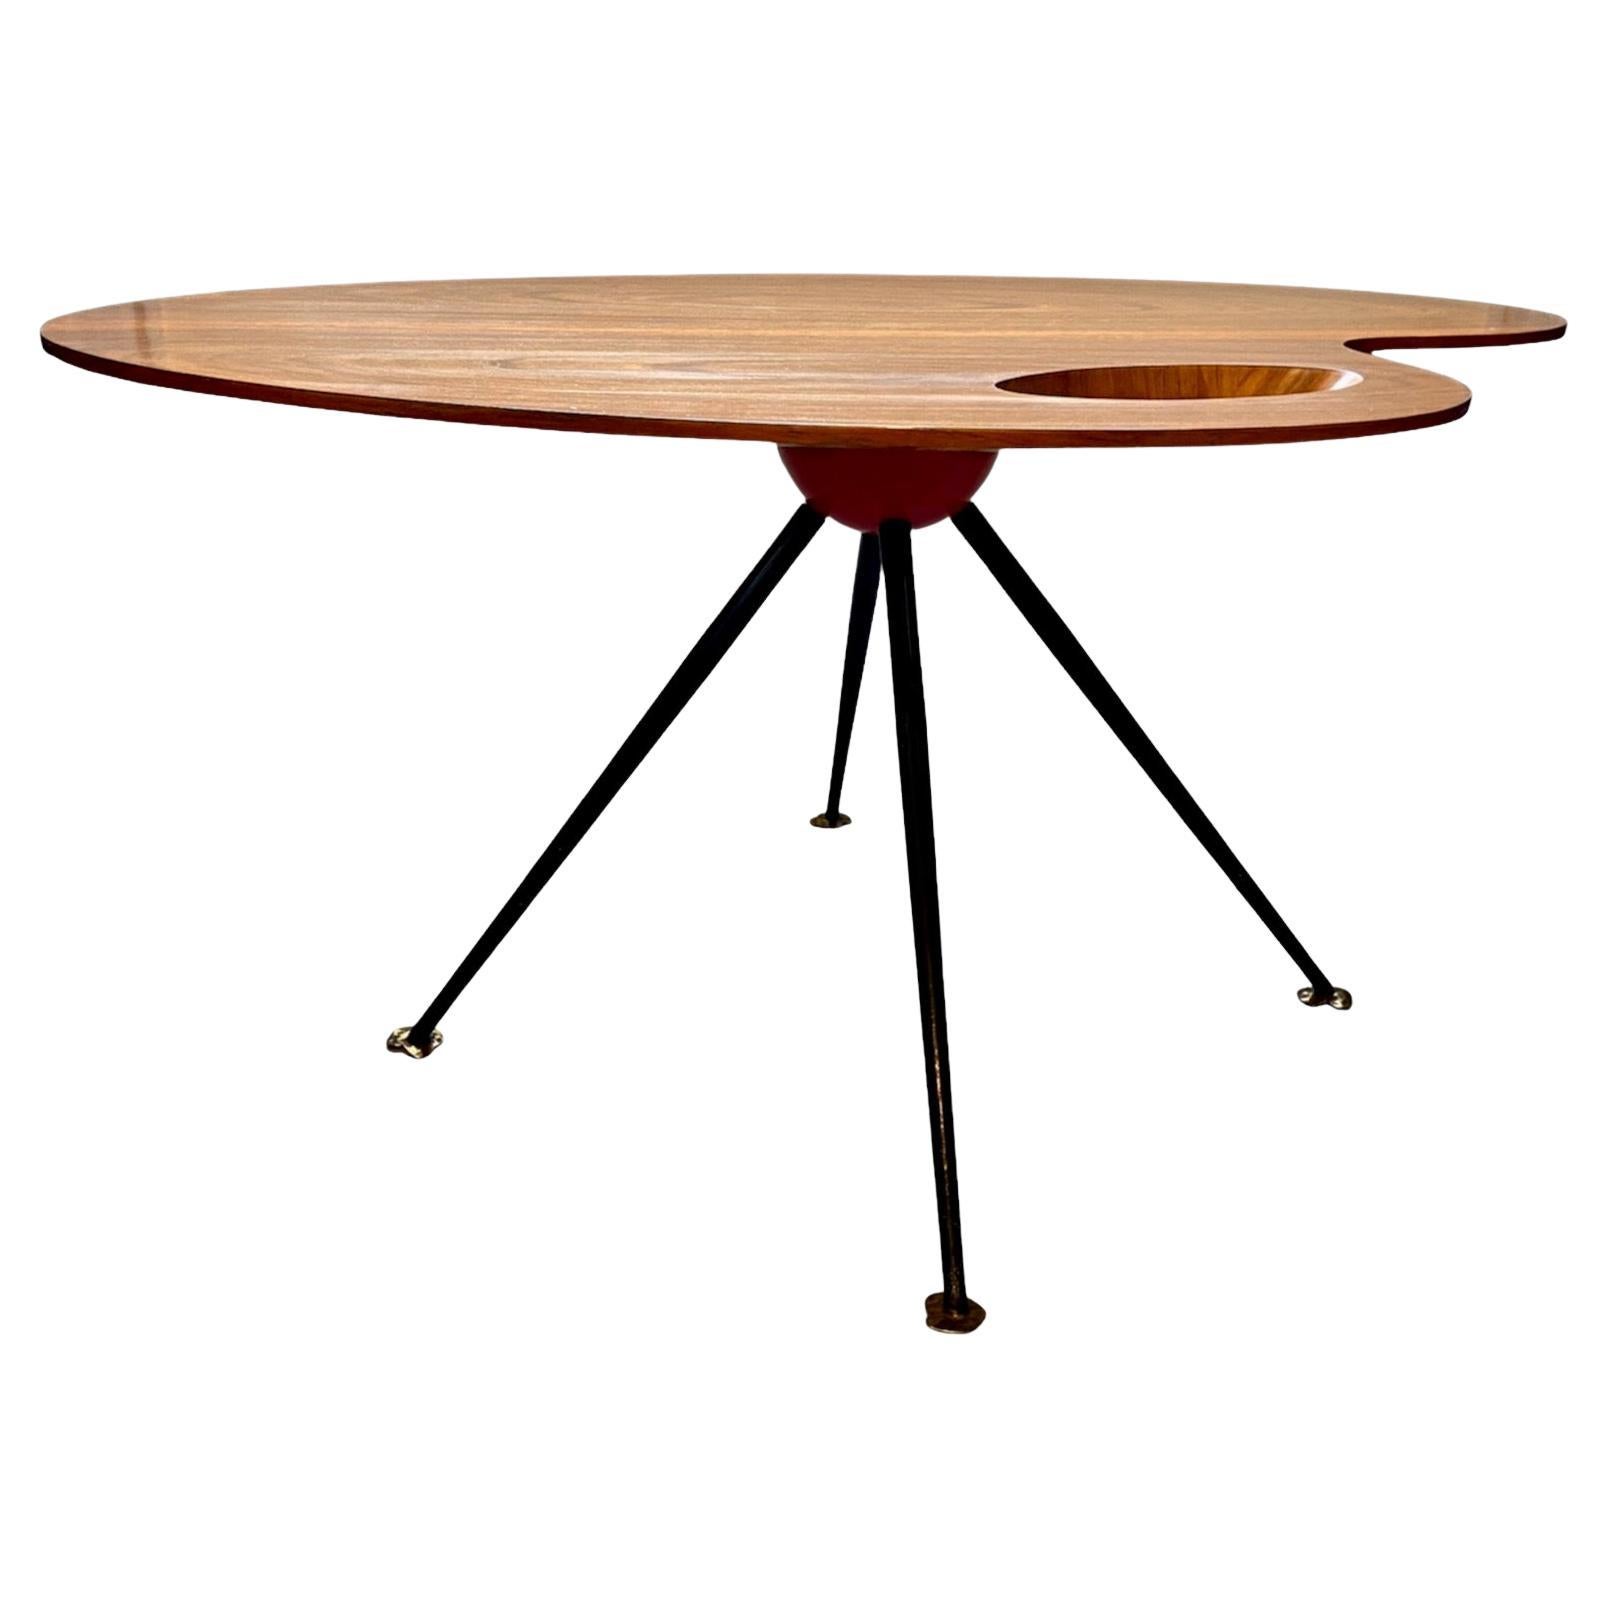 Midcentury Organic Shaped Coffee Table in the Manner of Gio Ponti, circa 1950s For Sale